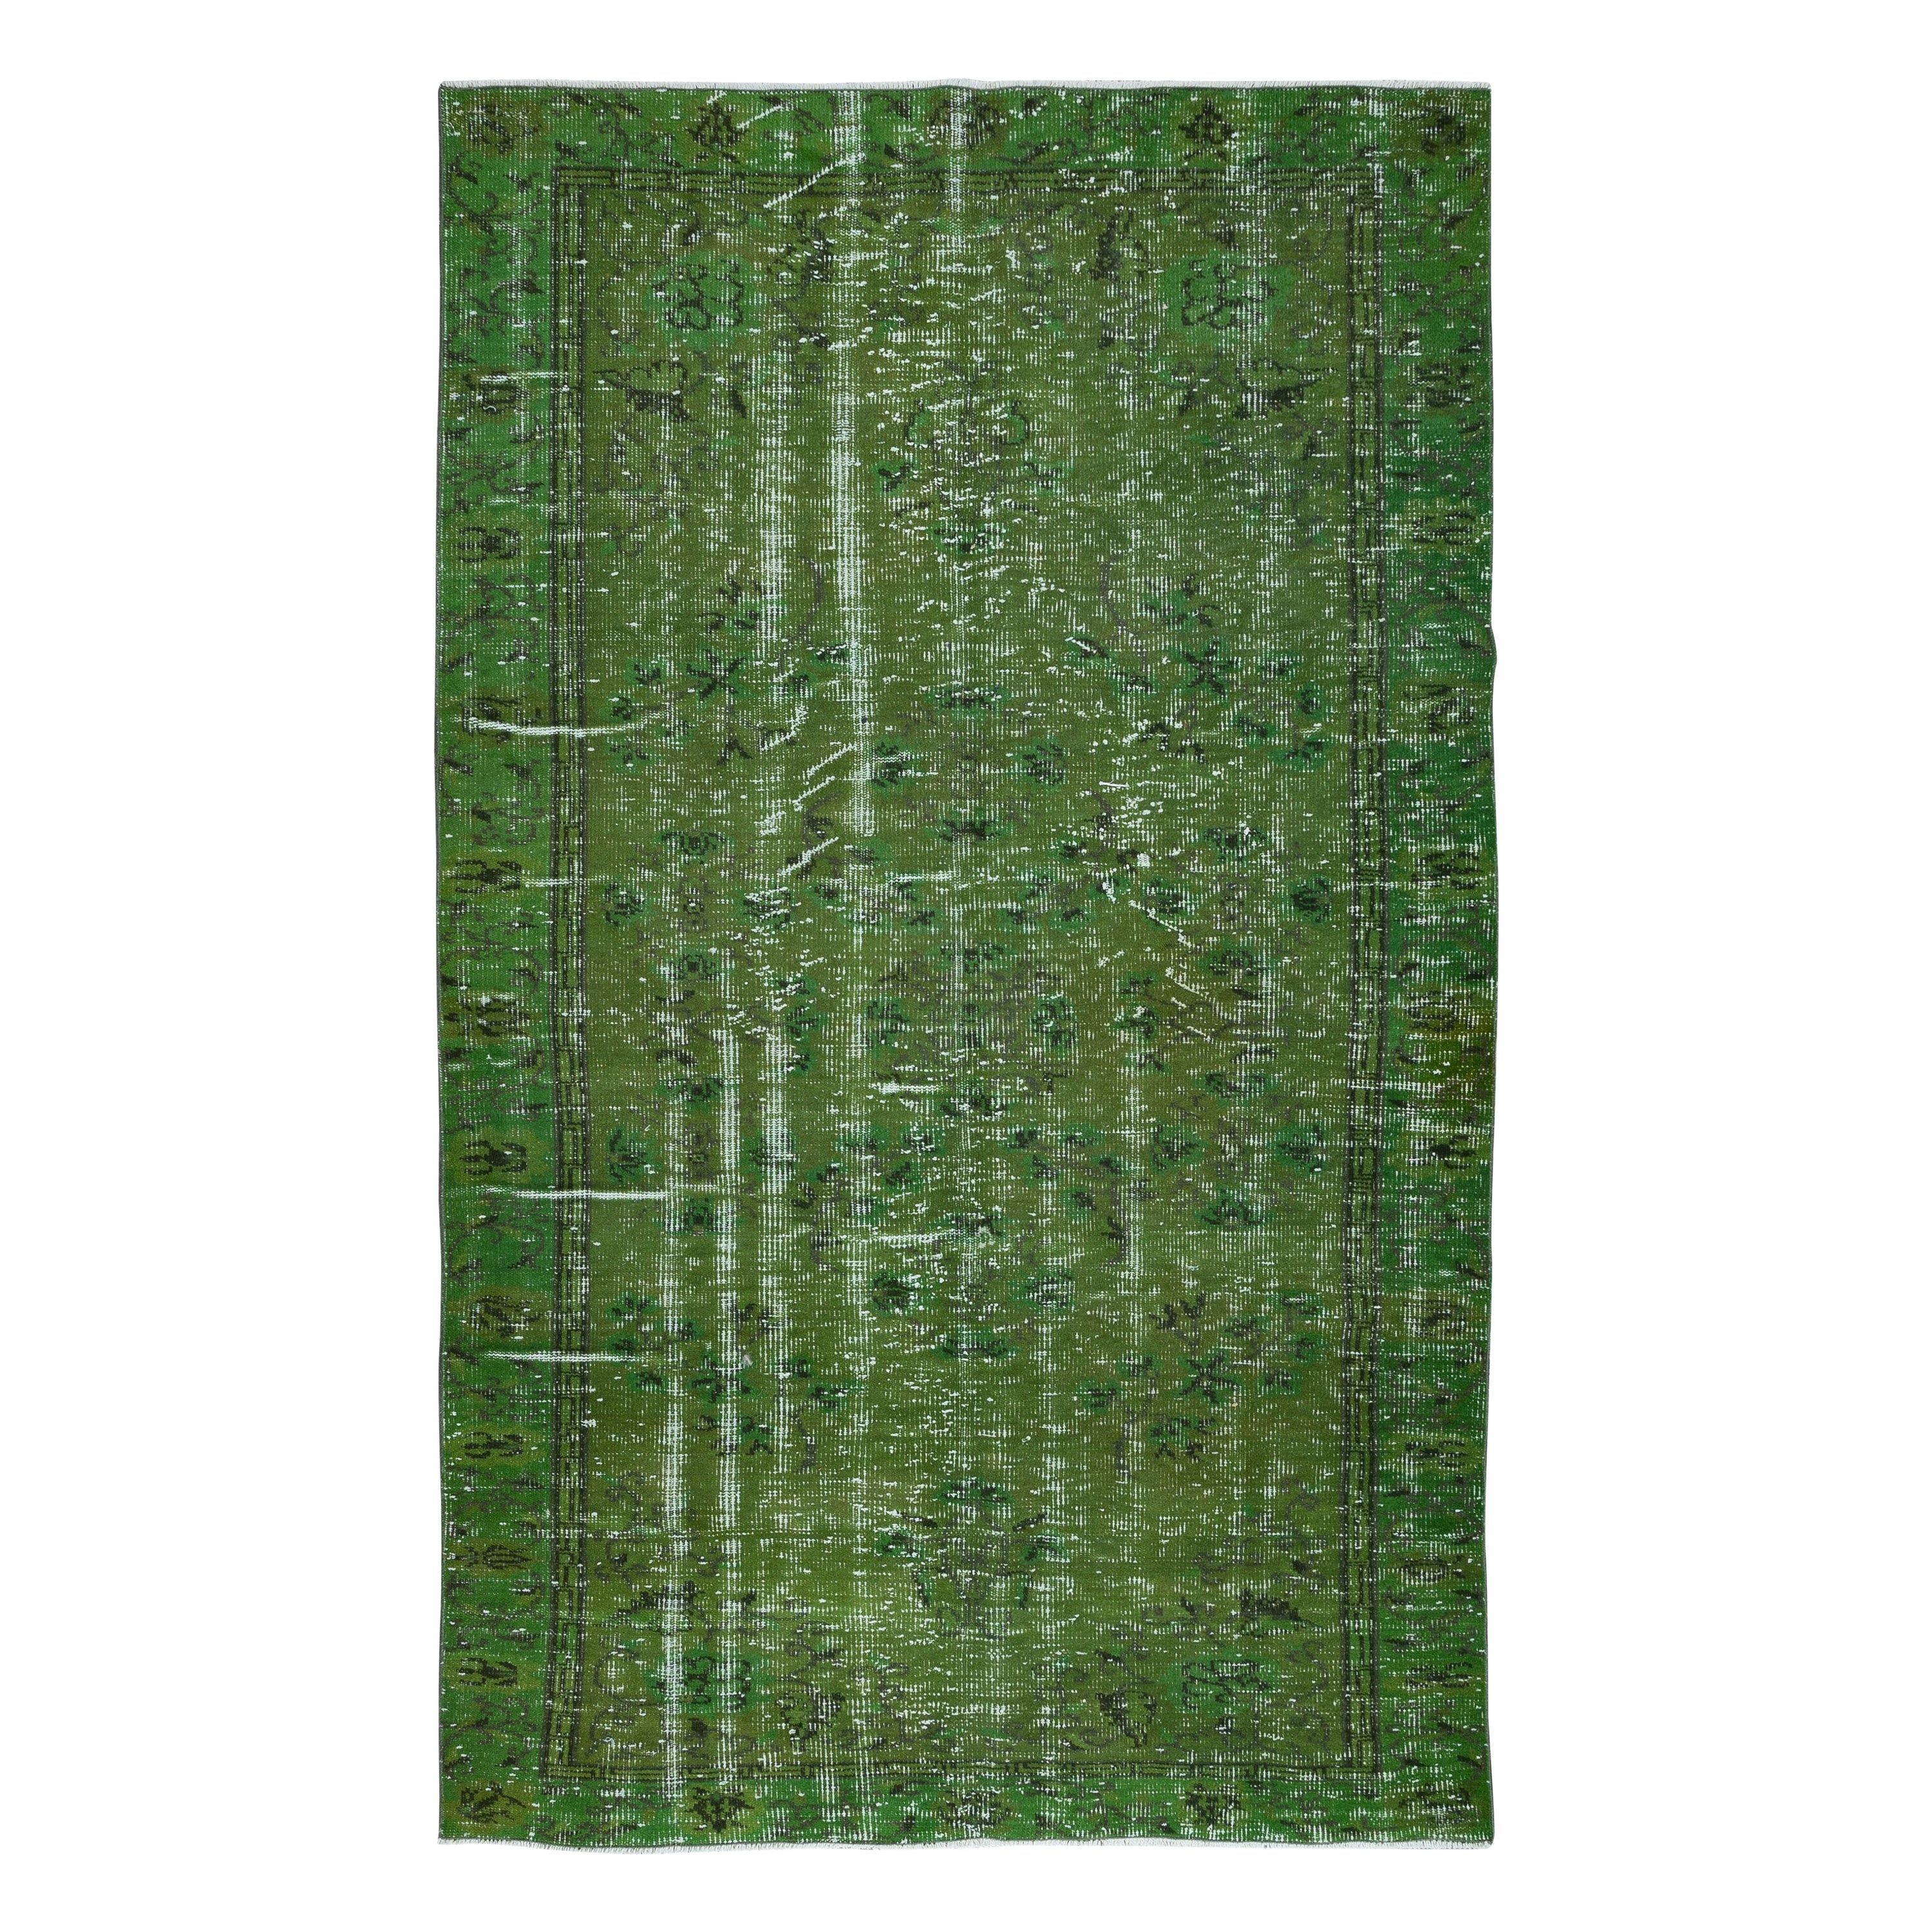 5.4x8.8 Ft Hand-Made Turkish Area Rug in Green, Modern Upcycled Wool Carpet